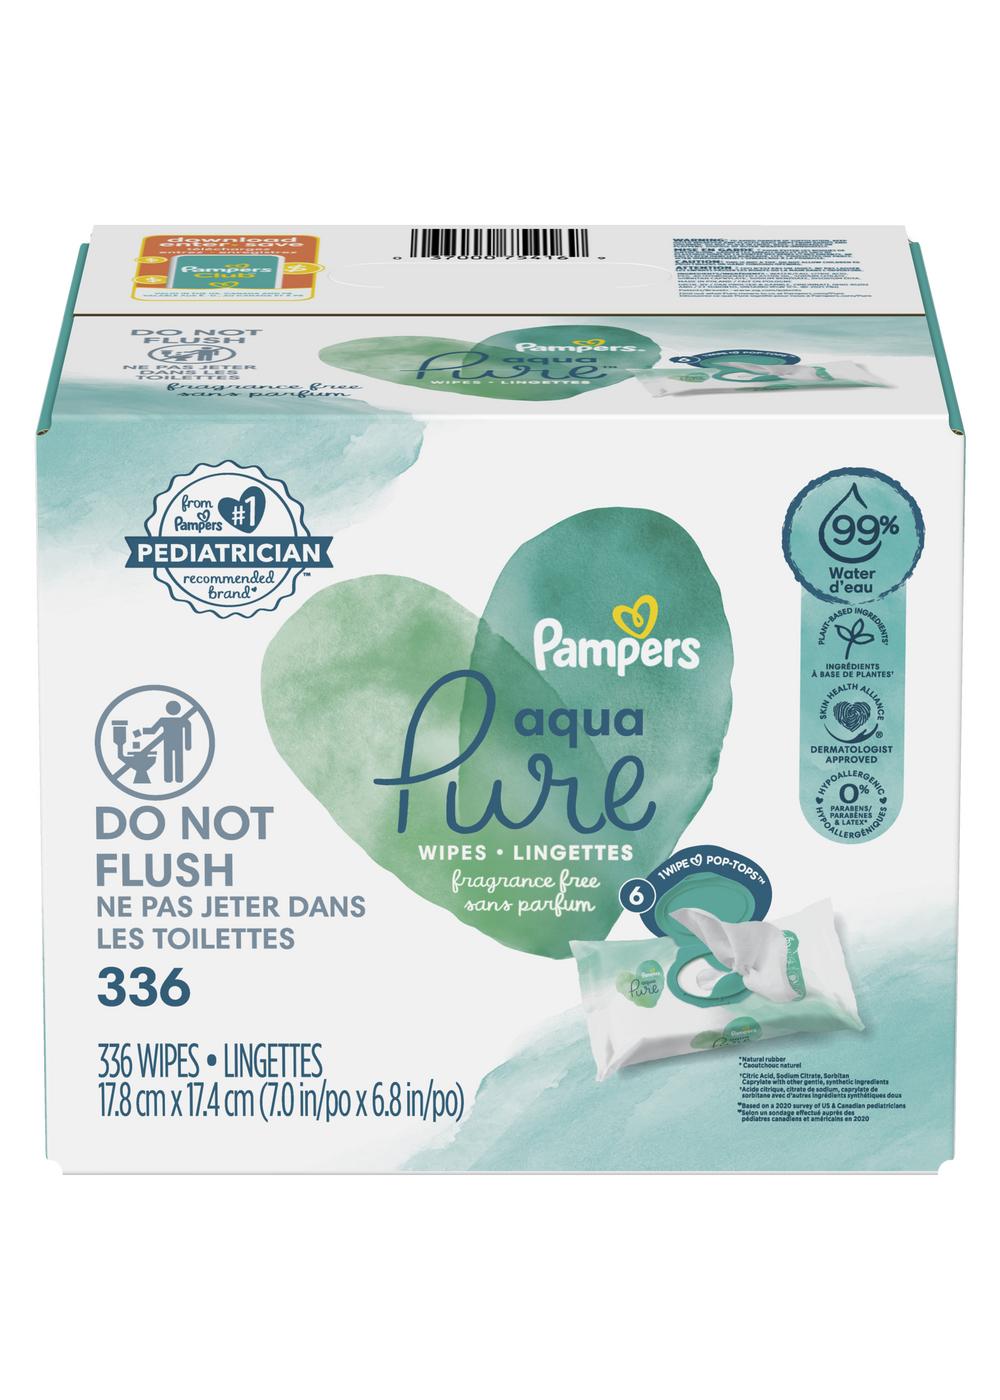 Pampers Aqua Pure Wipes review